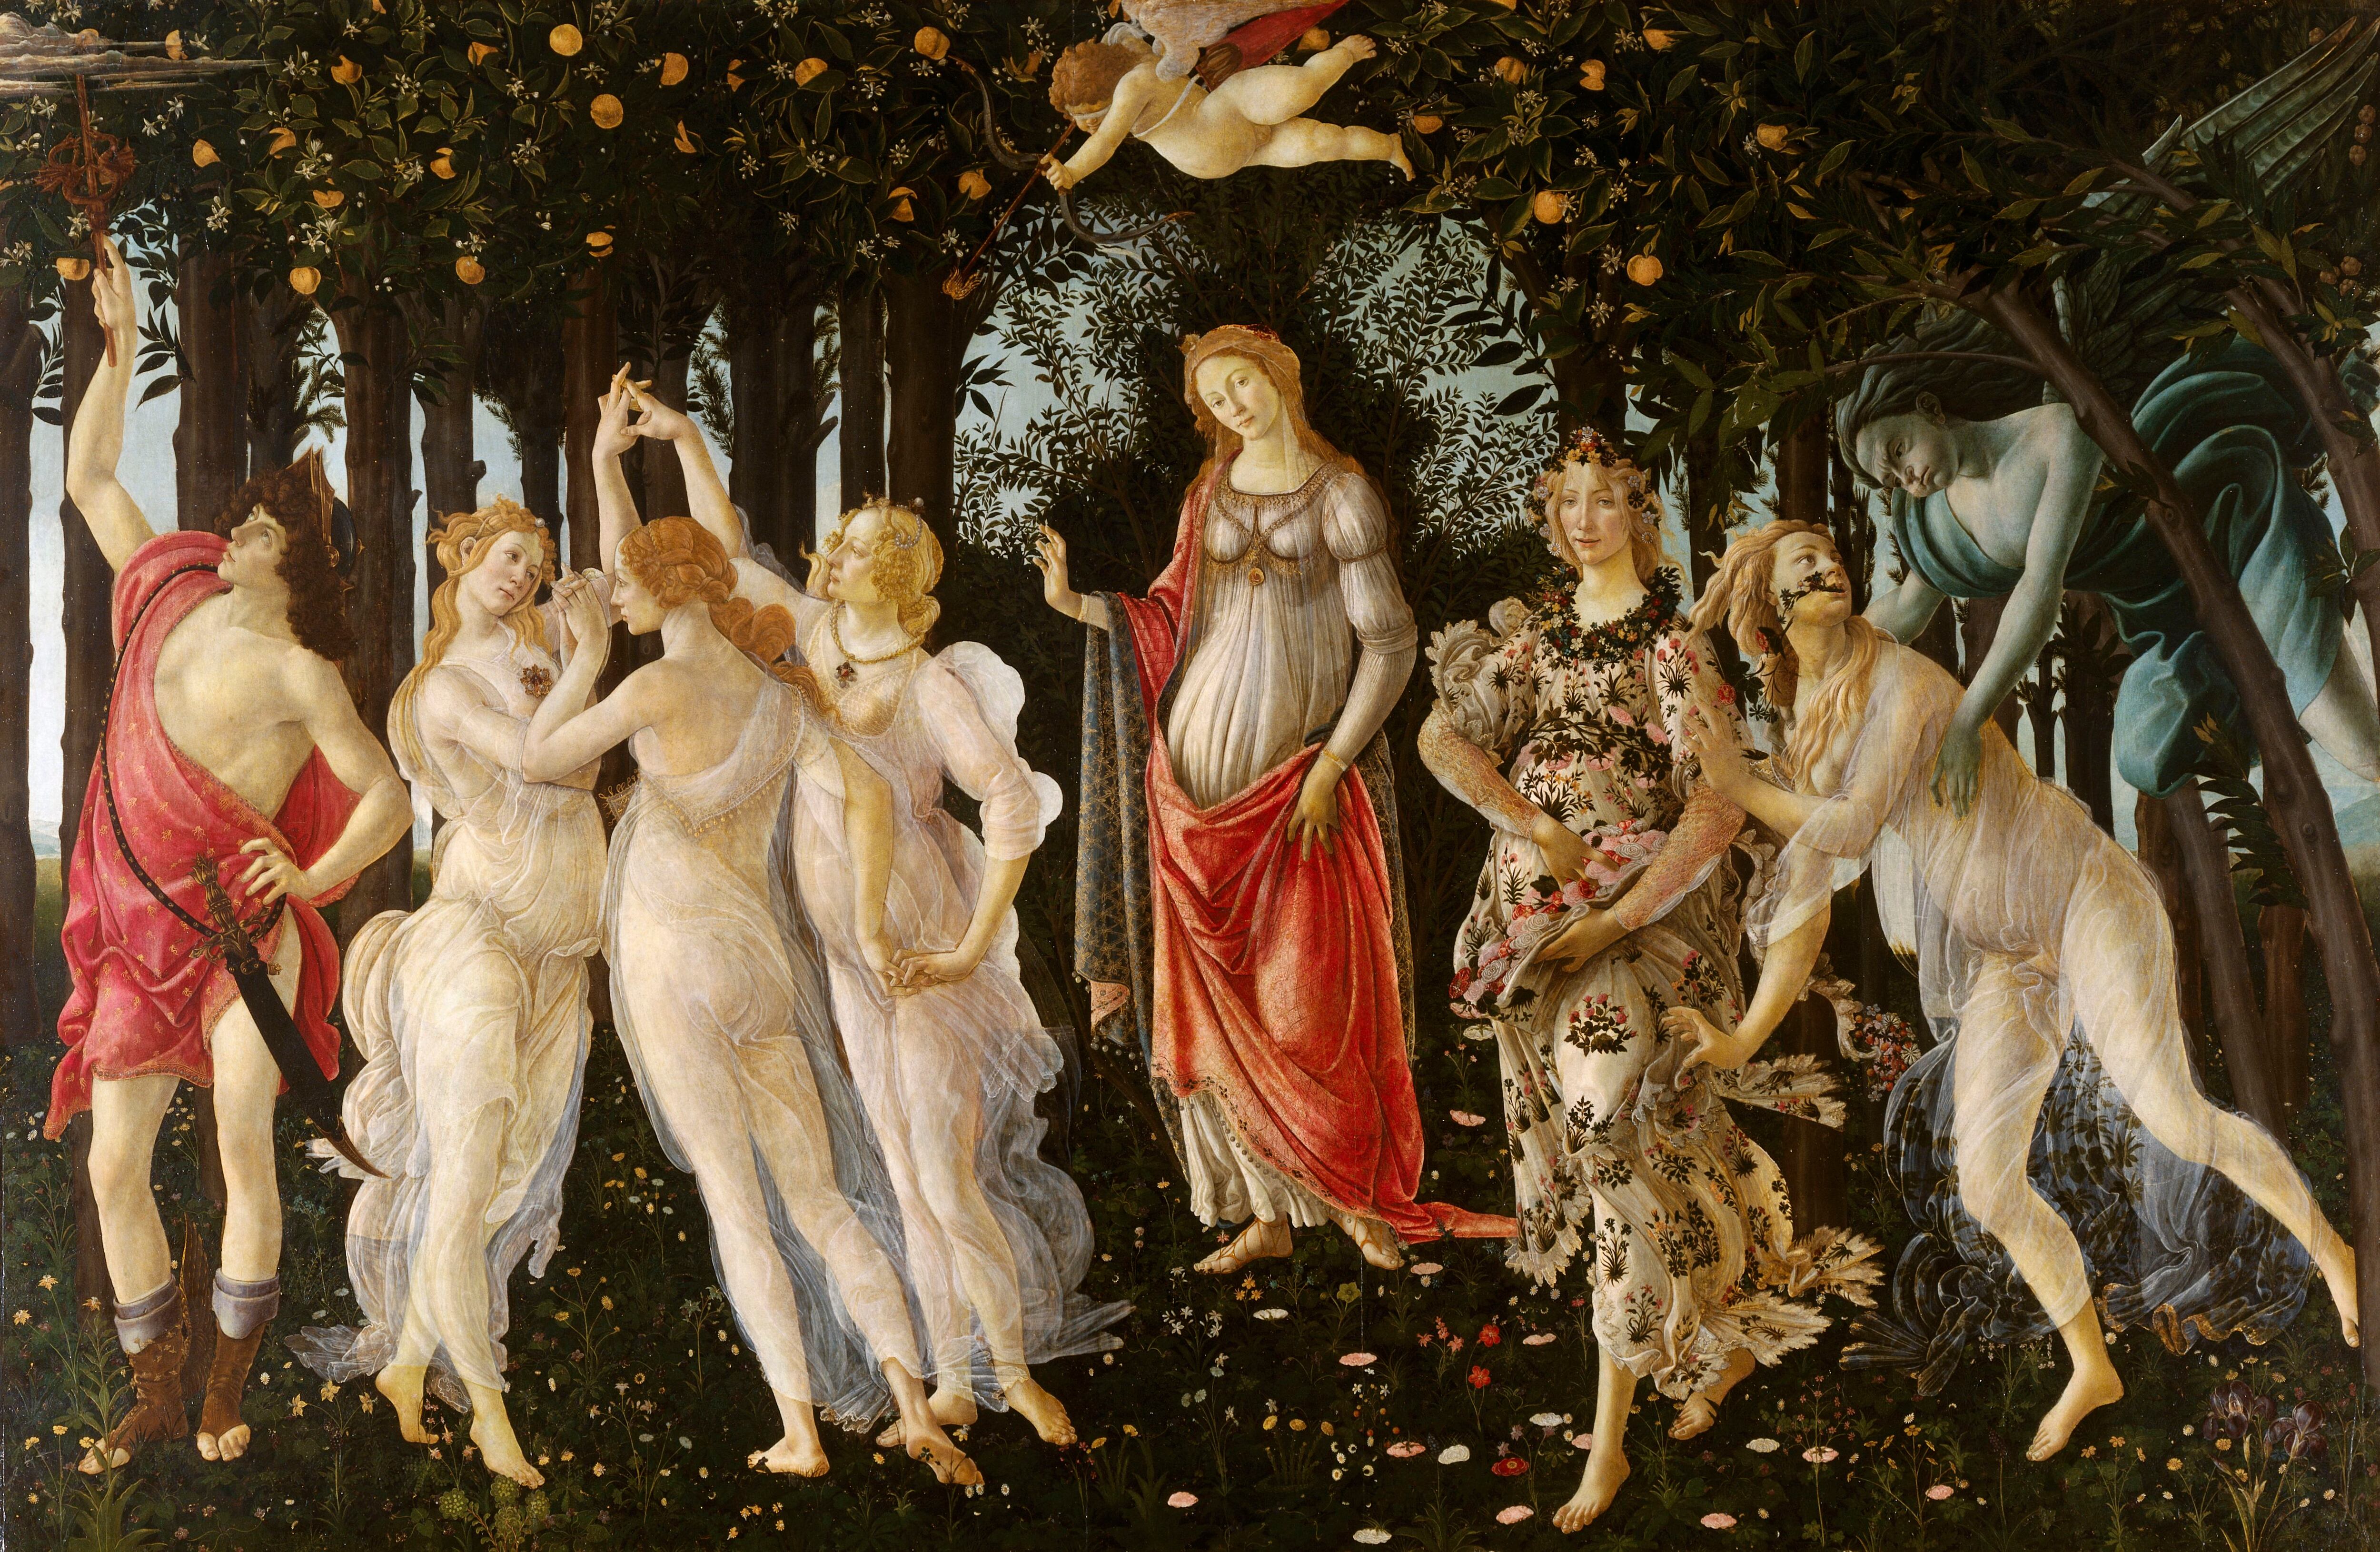 ‘Allegory of Spring’ by Botticelli.